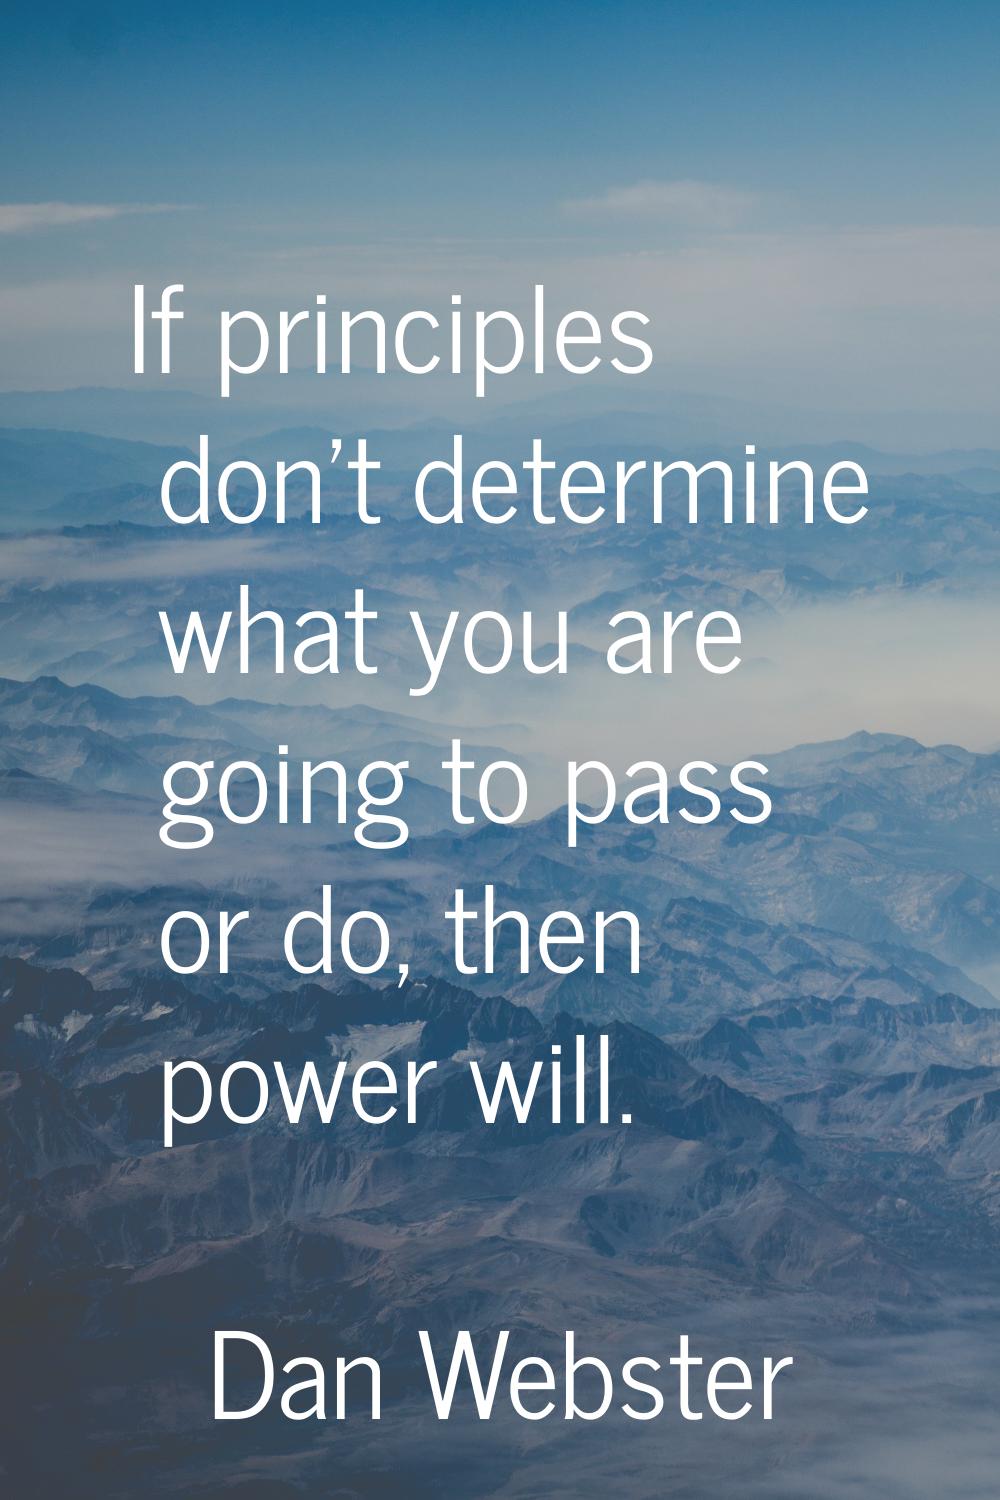 If principles don't determine what you are going to pass or do, then power will.